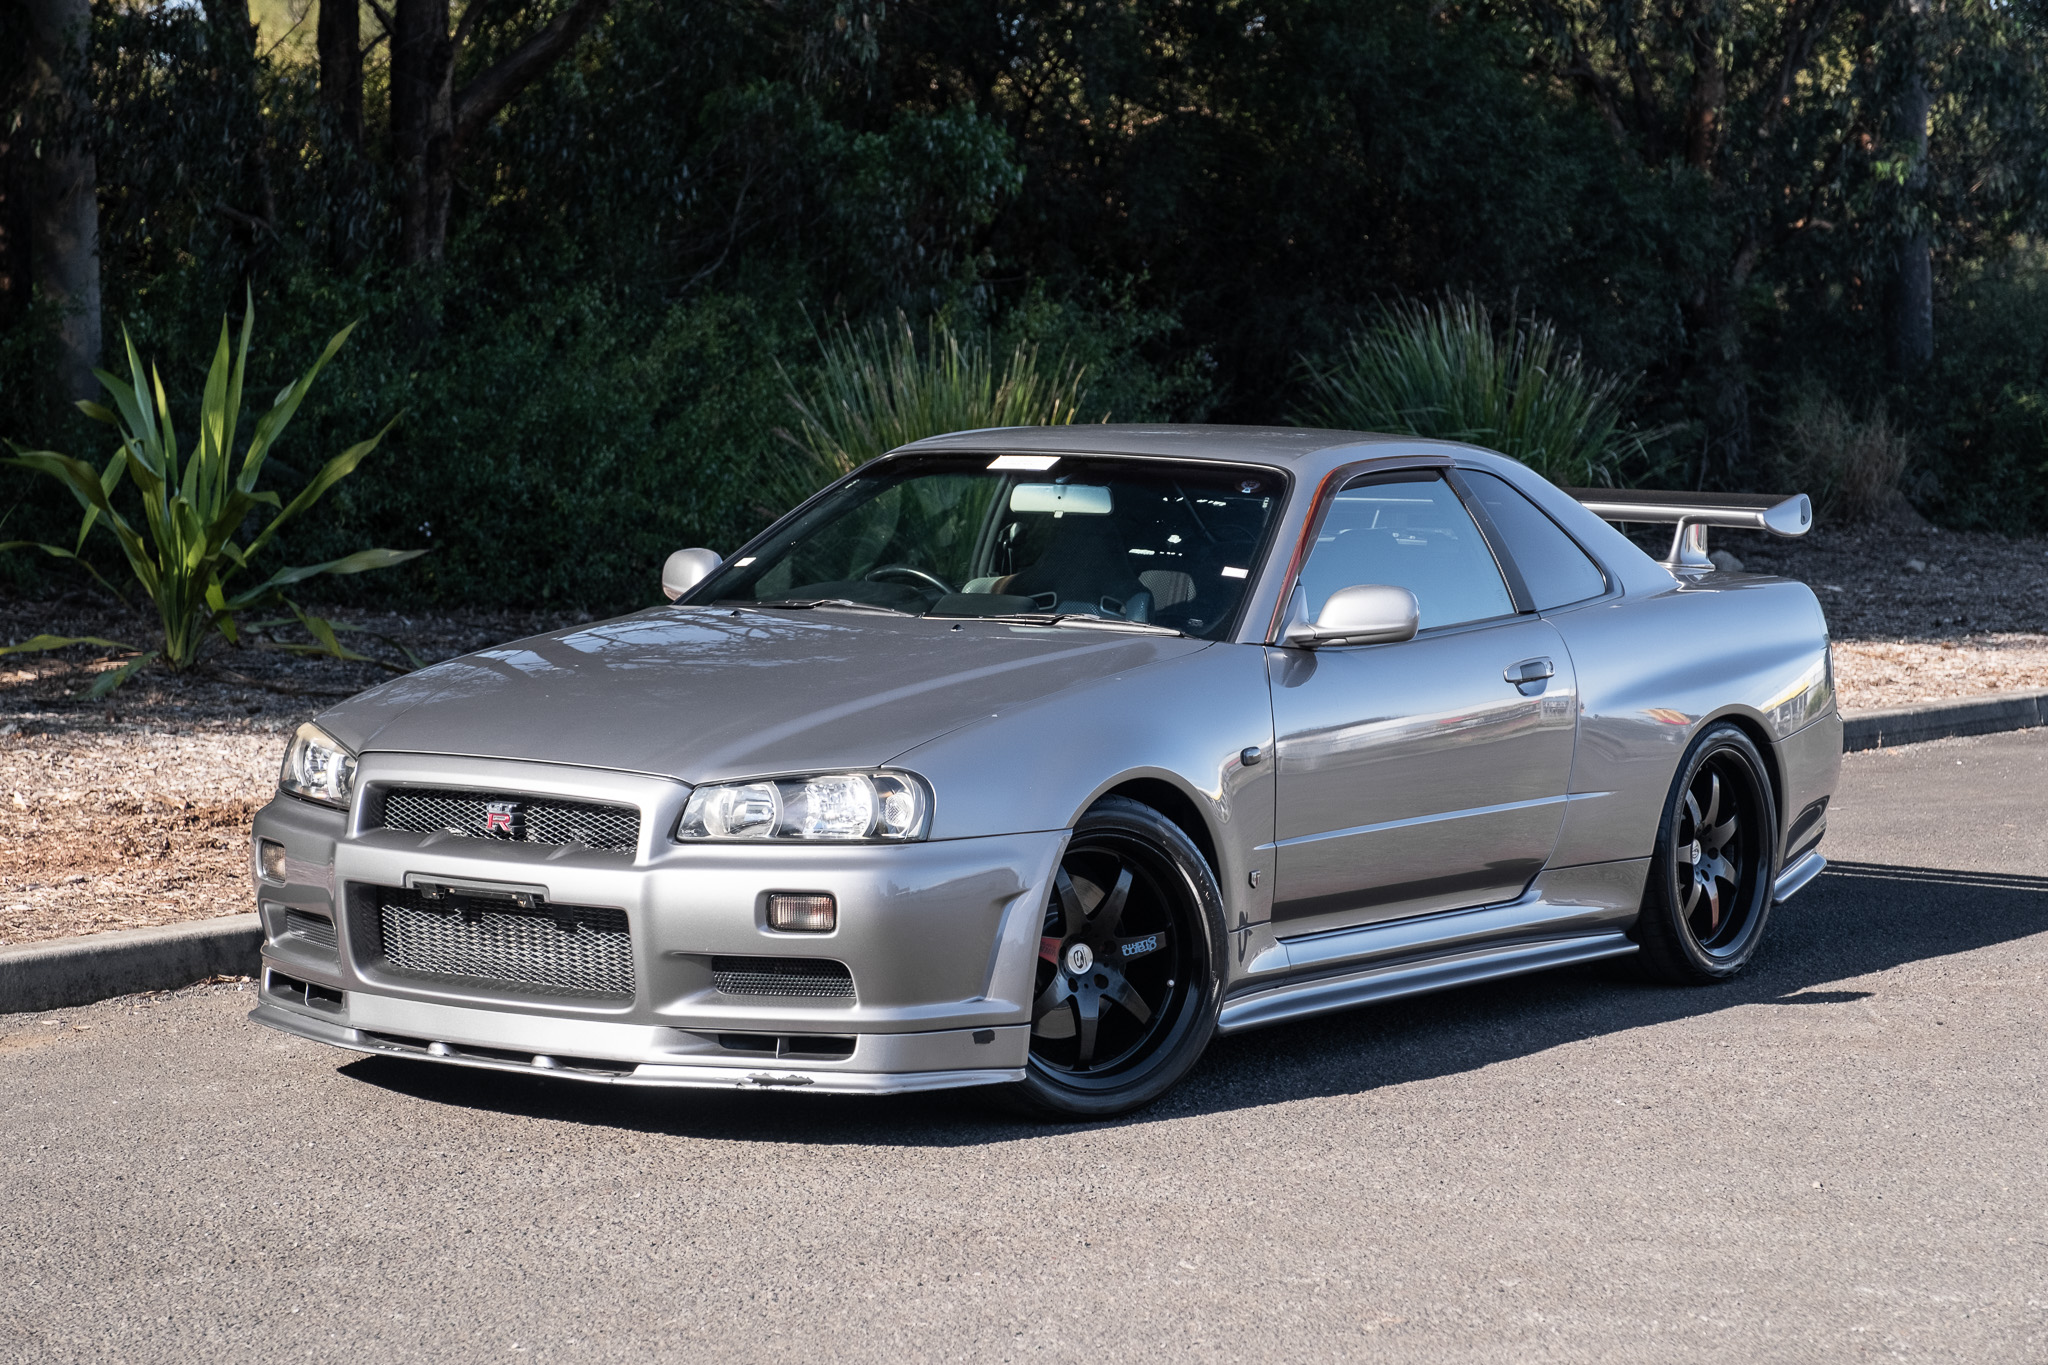 2000 NISSAN SKYLINE (R34) GT-R V-SPEC for sale by auction in